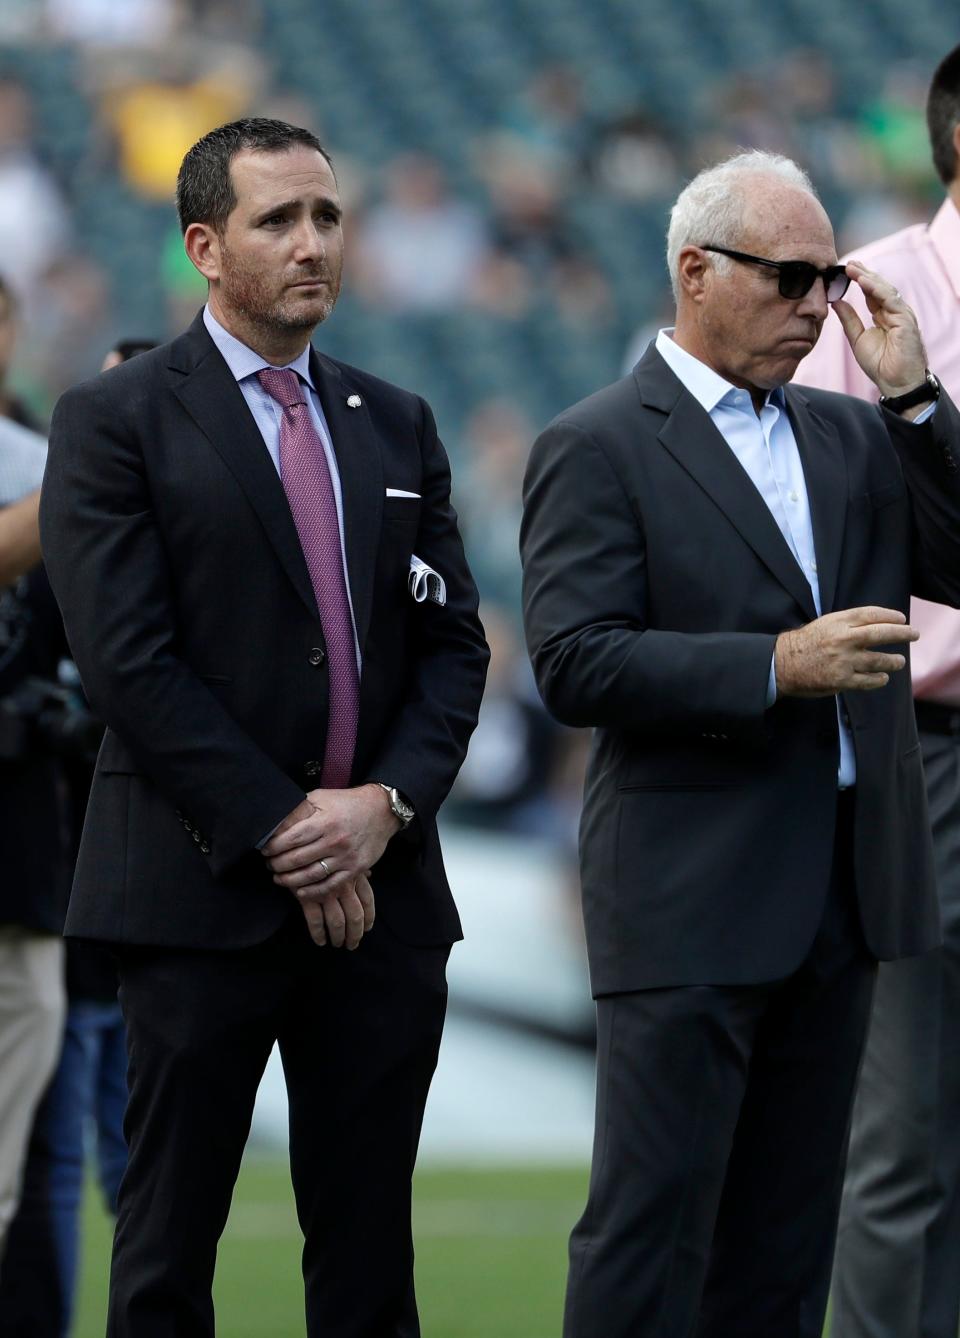 Philadelphia Eagles' Howie Roseman, left, and Jeffrey Lurie and seen during an NFL football game against the Minnesota Vikings, Sunday, Oct. 7, 2018, in Philadelphia. (AP Photo/Michael Perez)